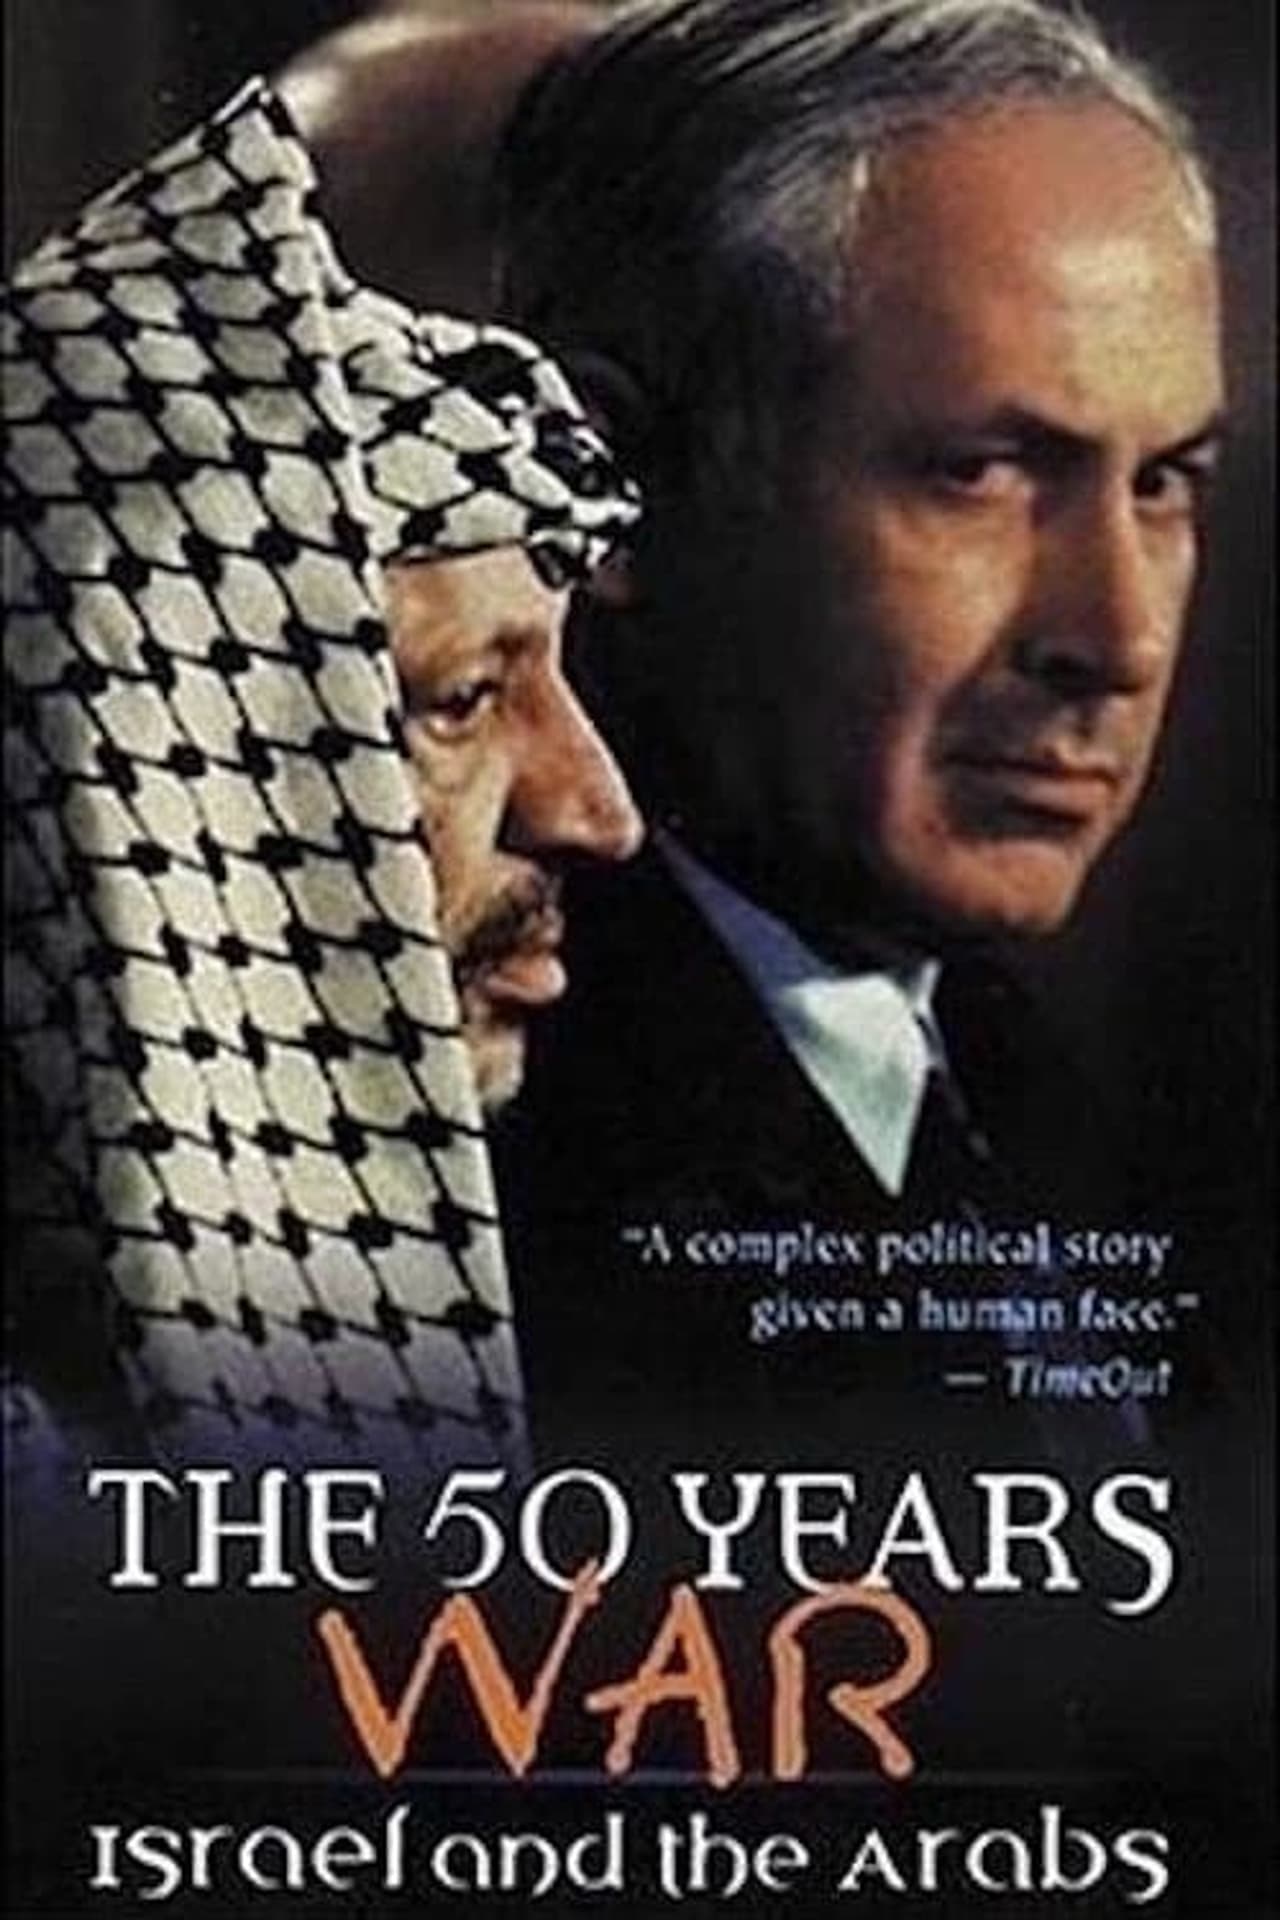 Israel and the Arabs: The 50 Years War